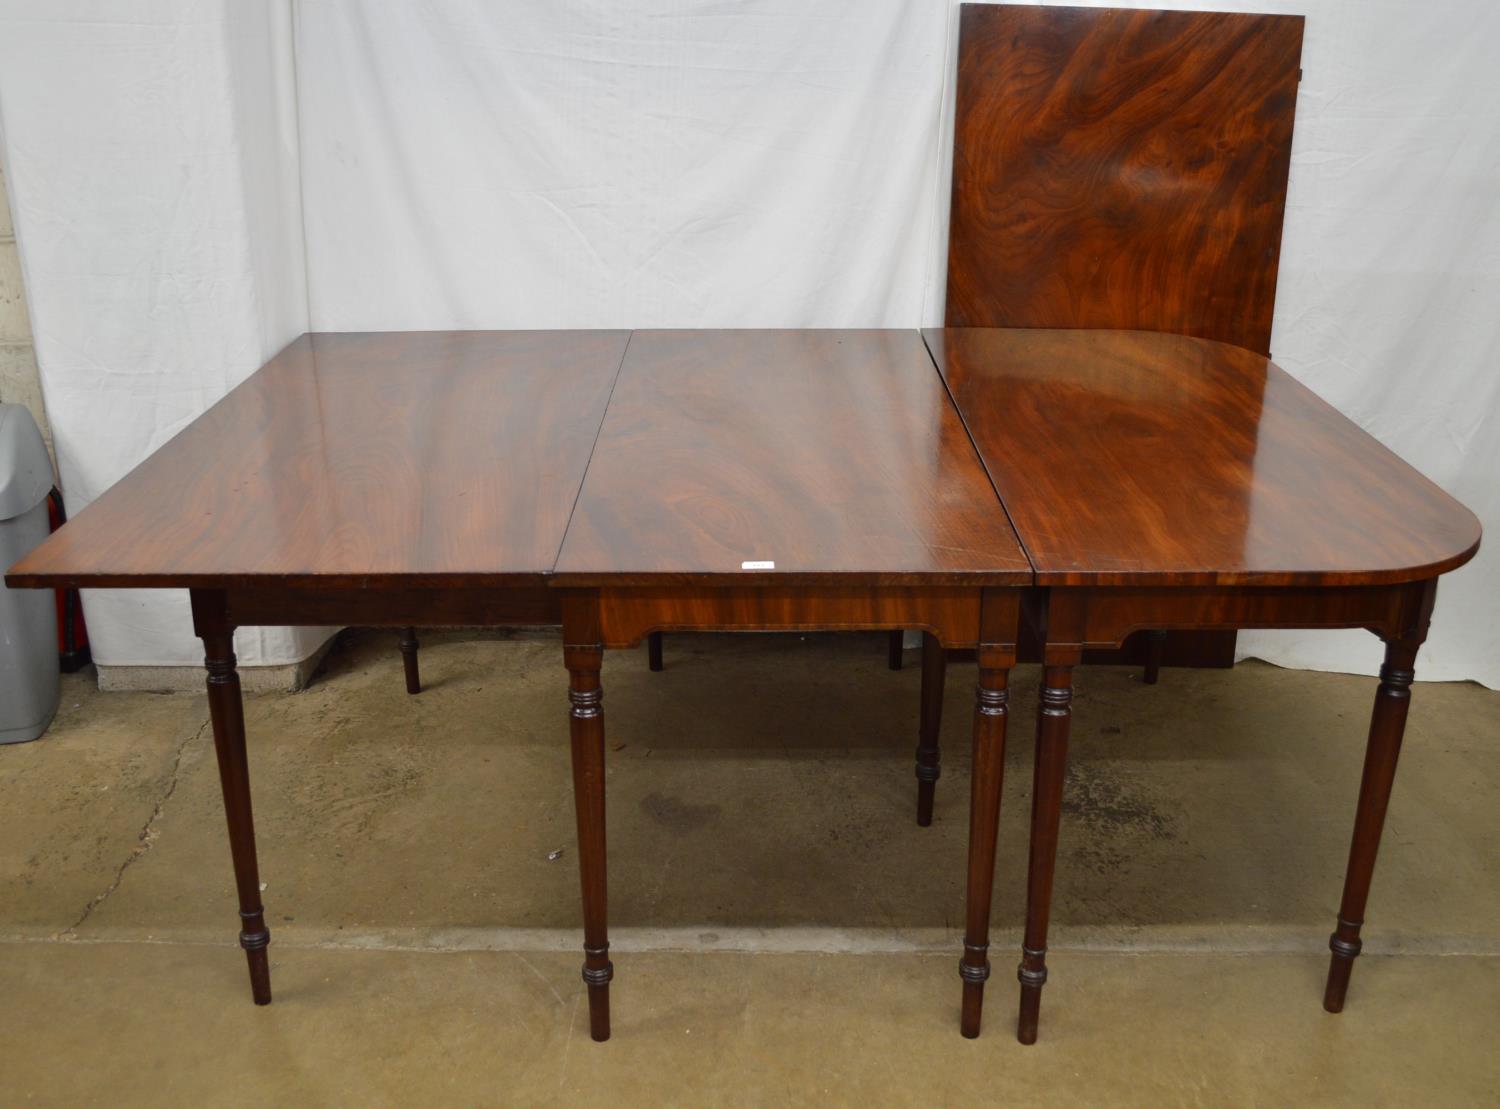 Georgian mahogany dining table with drop leaf and extra leaf, standing on turned legs - 257.5cm (